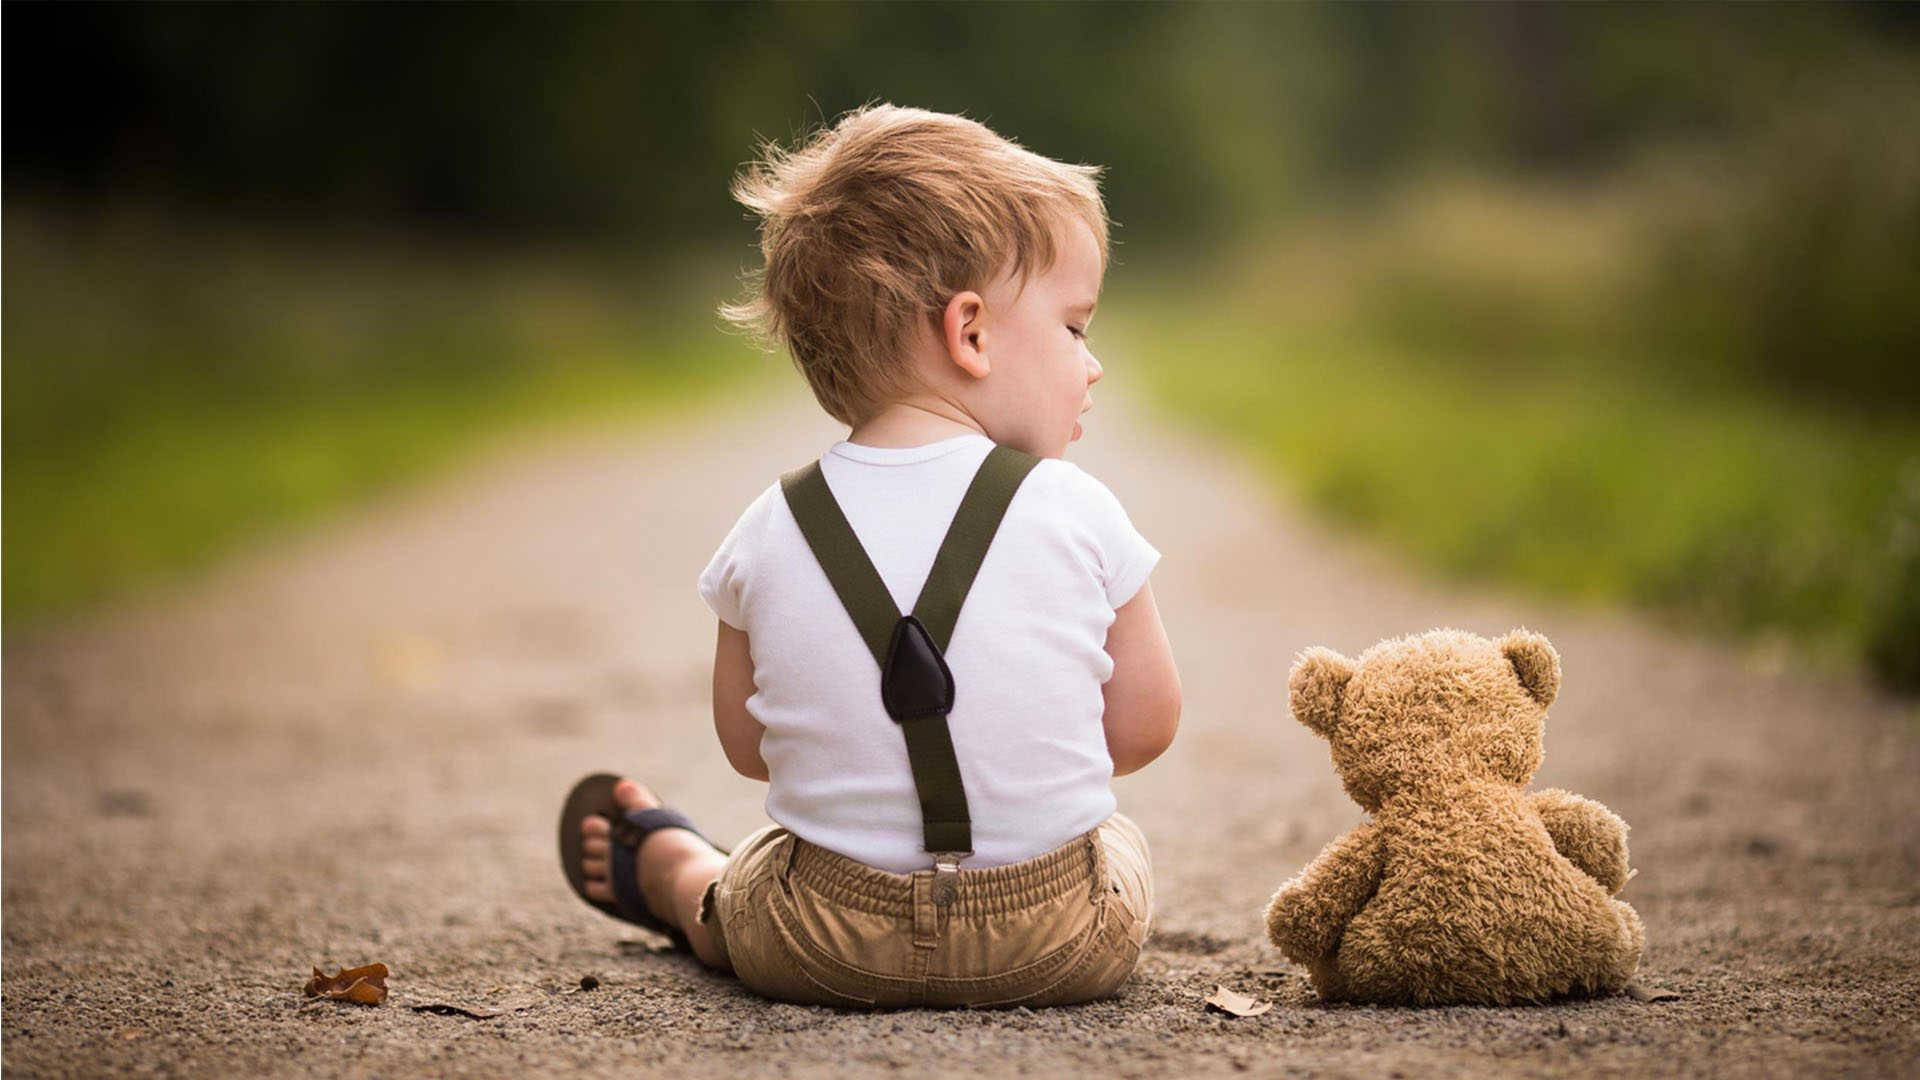 Boy Child With Teddy Bear On The Road Wallpaper